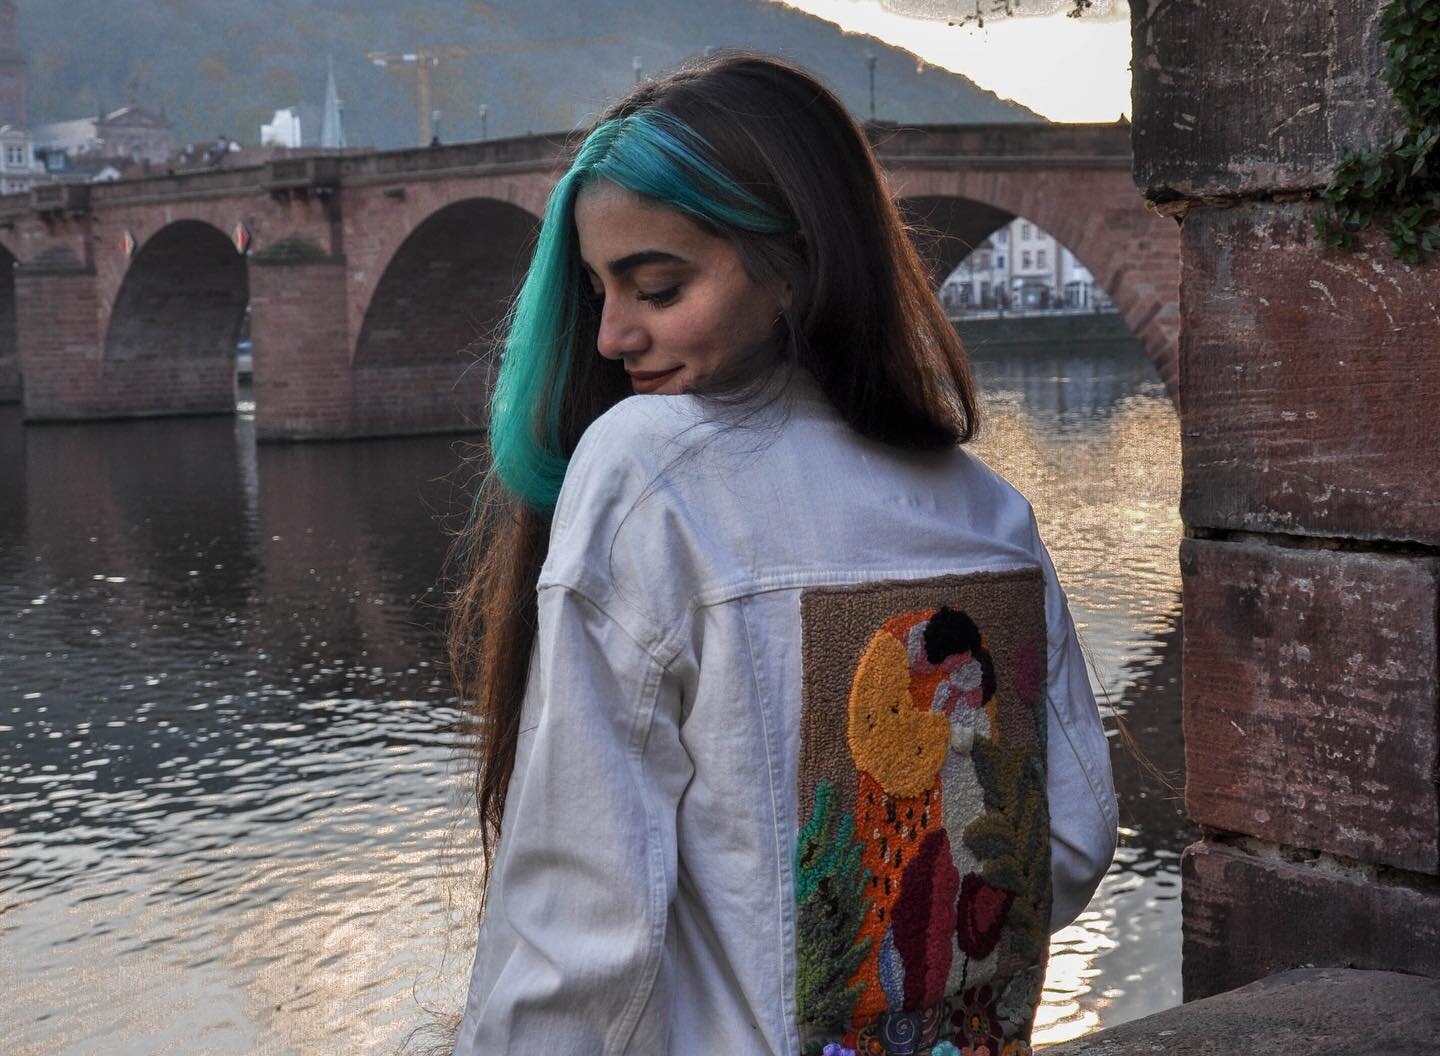 This jacket pays tribute to the painting &lsquo;The Kiss&rsquo; by Gustave Klimt. The panel on its back, made with the punch needle technique, reinterprets the artwork with clear forms and bold colors, emphasizing the tenderness and richness, which a